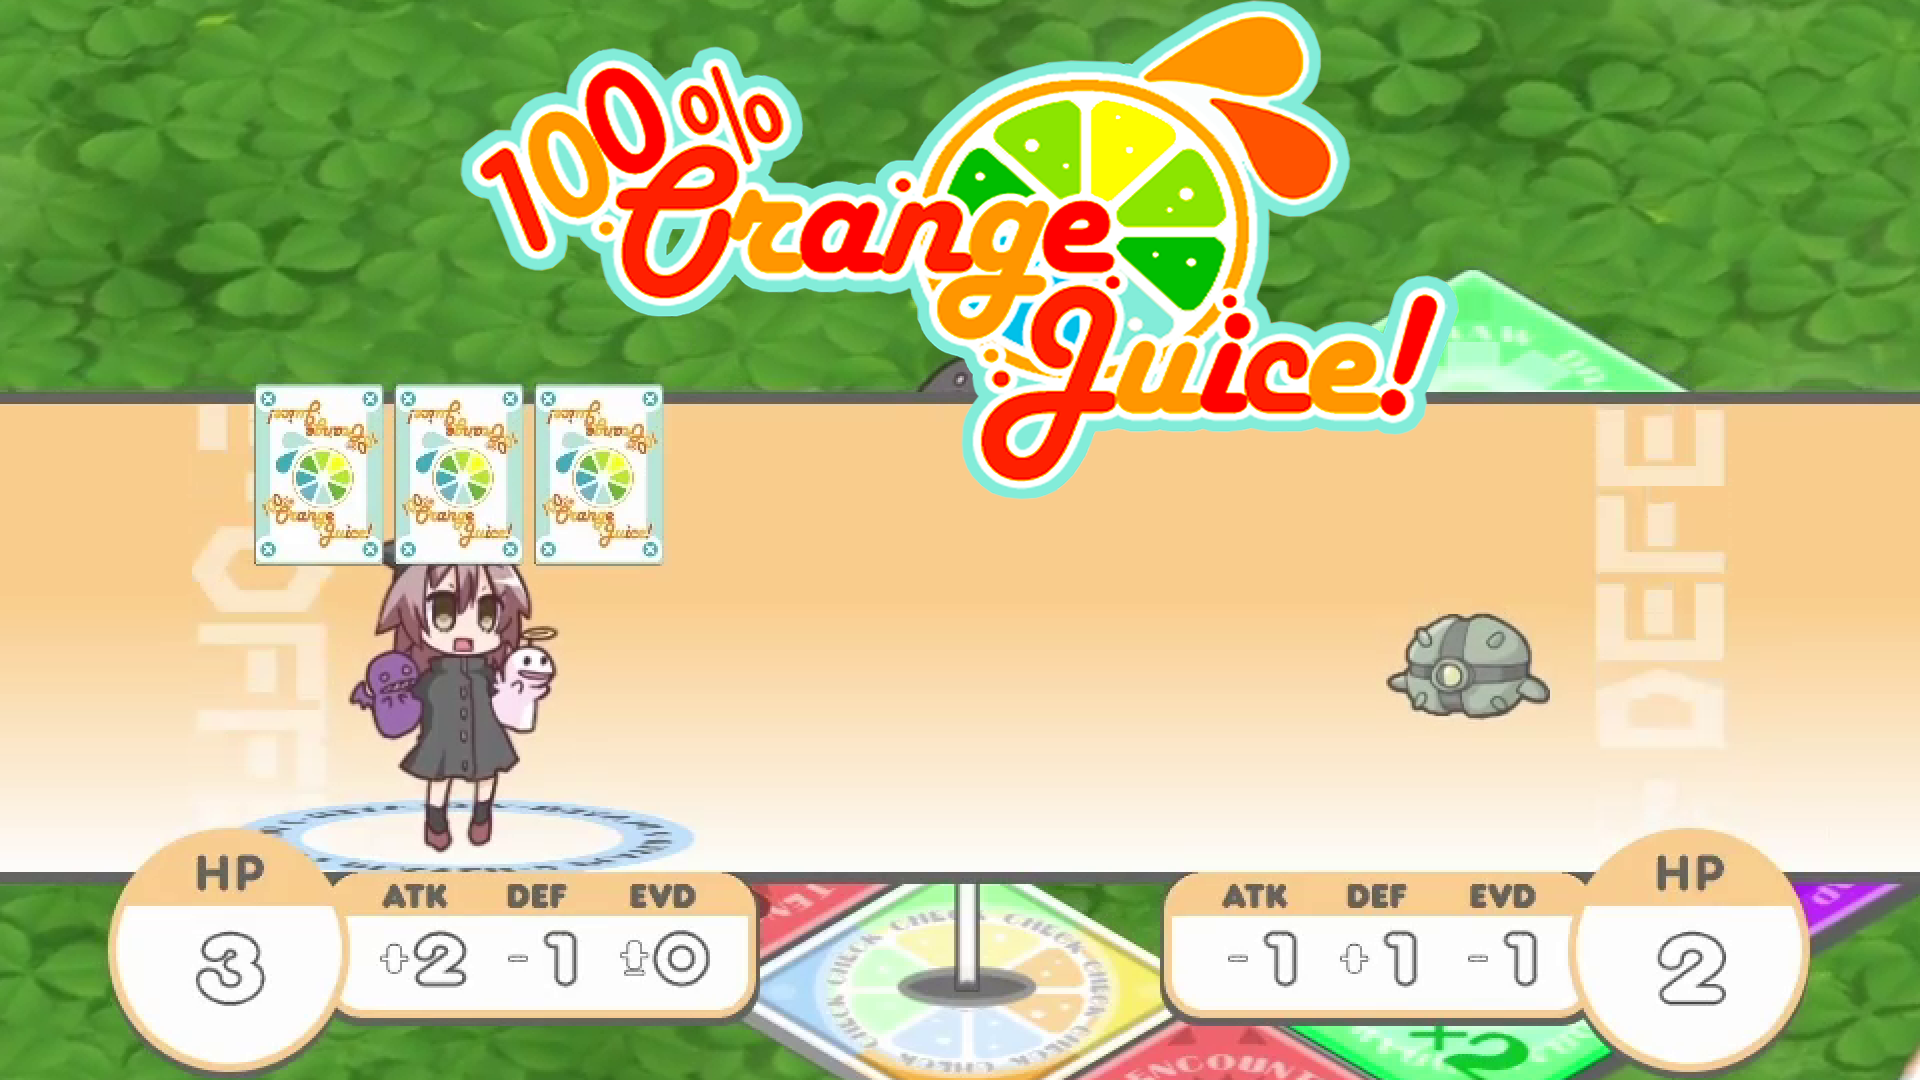 Michel Suggested That We Play This Again – 100% Orange Juice